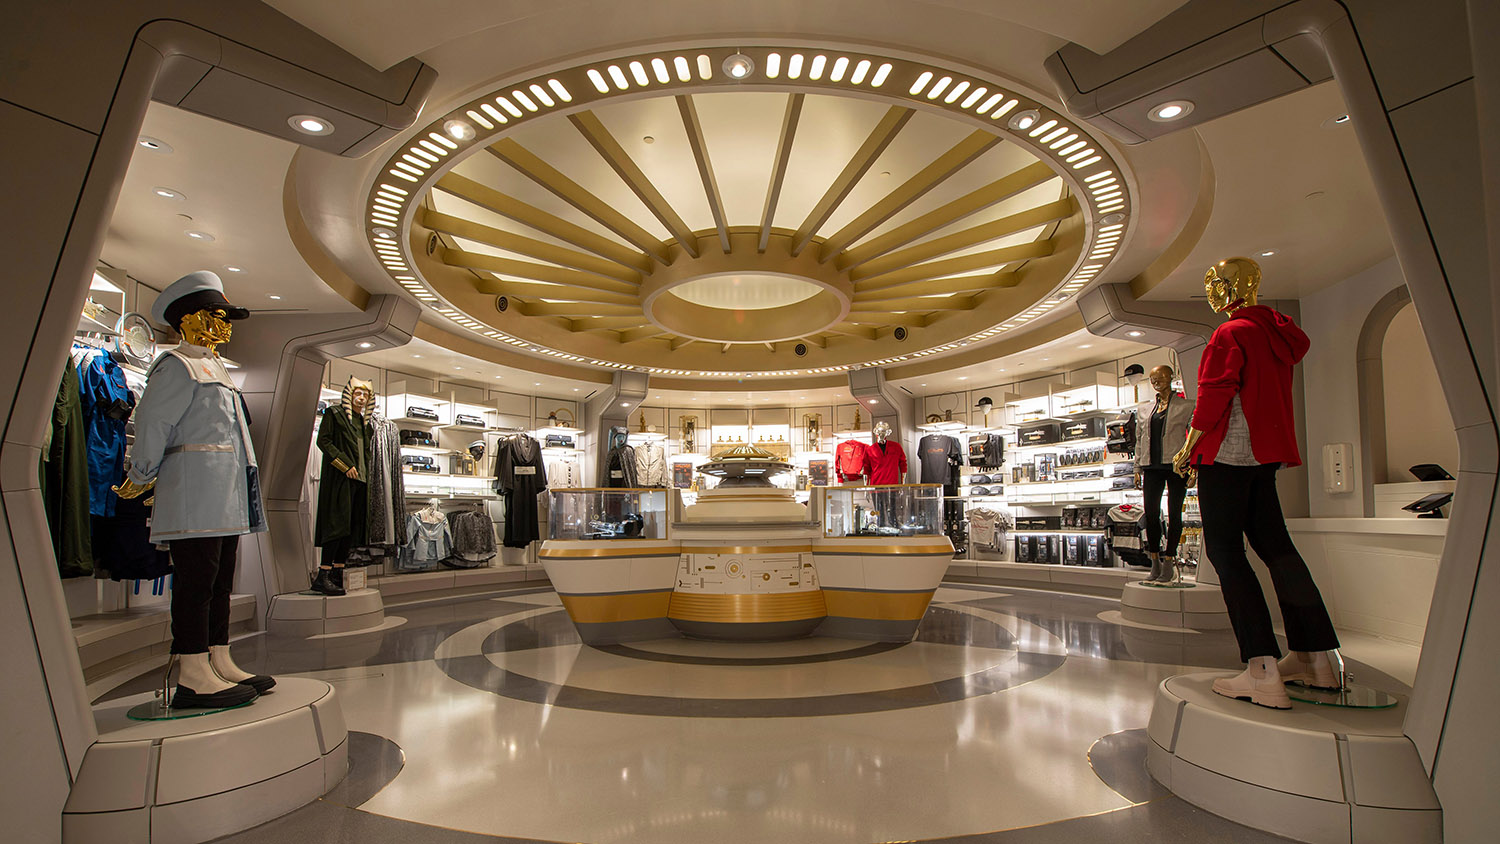 The Chandrila Collection is a boutique off the Atrium of the Halcyon starcruiser where passengers can dress in galactic fashion as part of their stay at Star Wars: Galactic Starcruiser at Walt Disney World Resort in Lake Buena Vista, Fla. ()